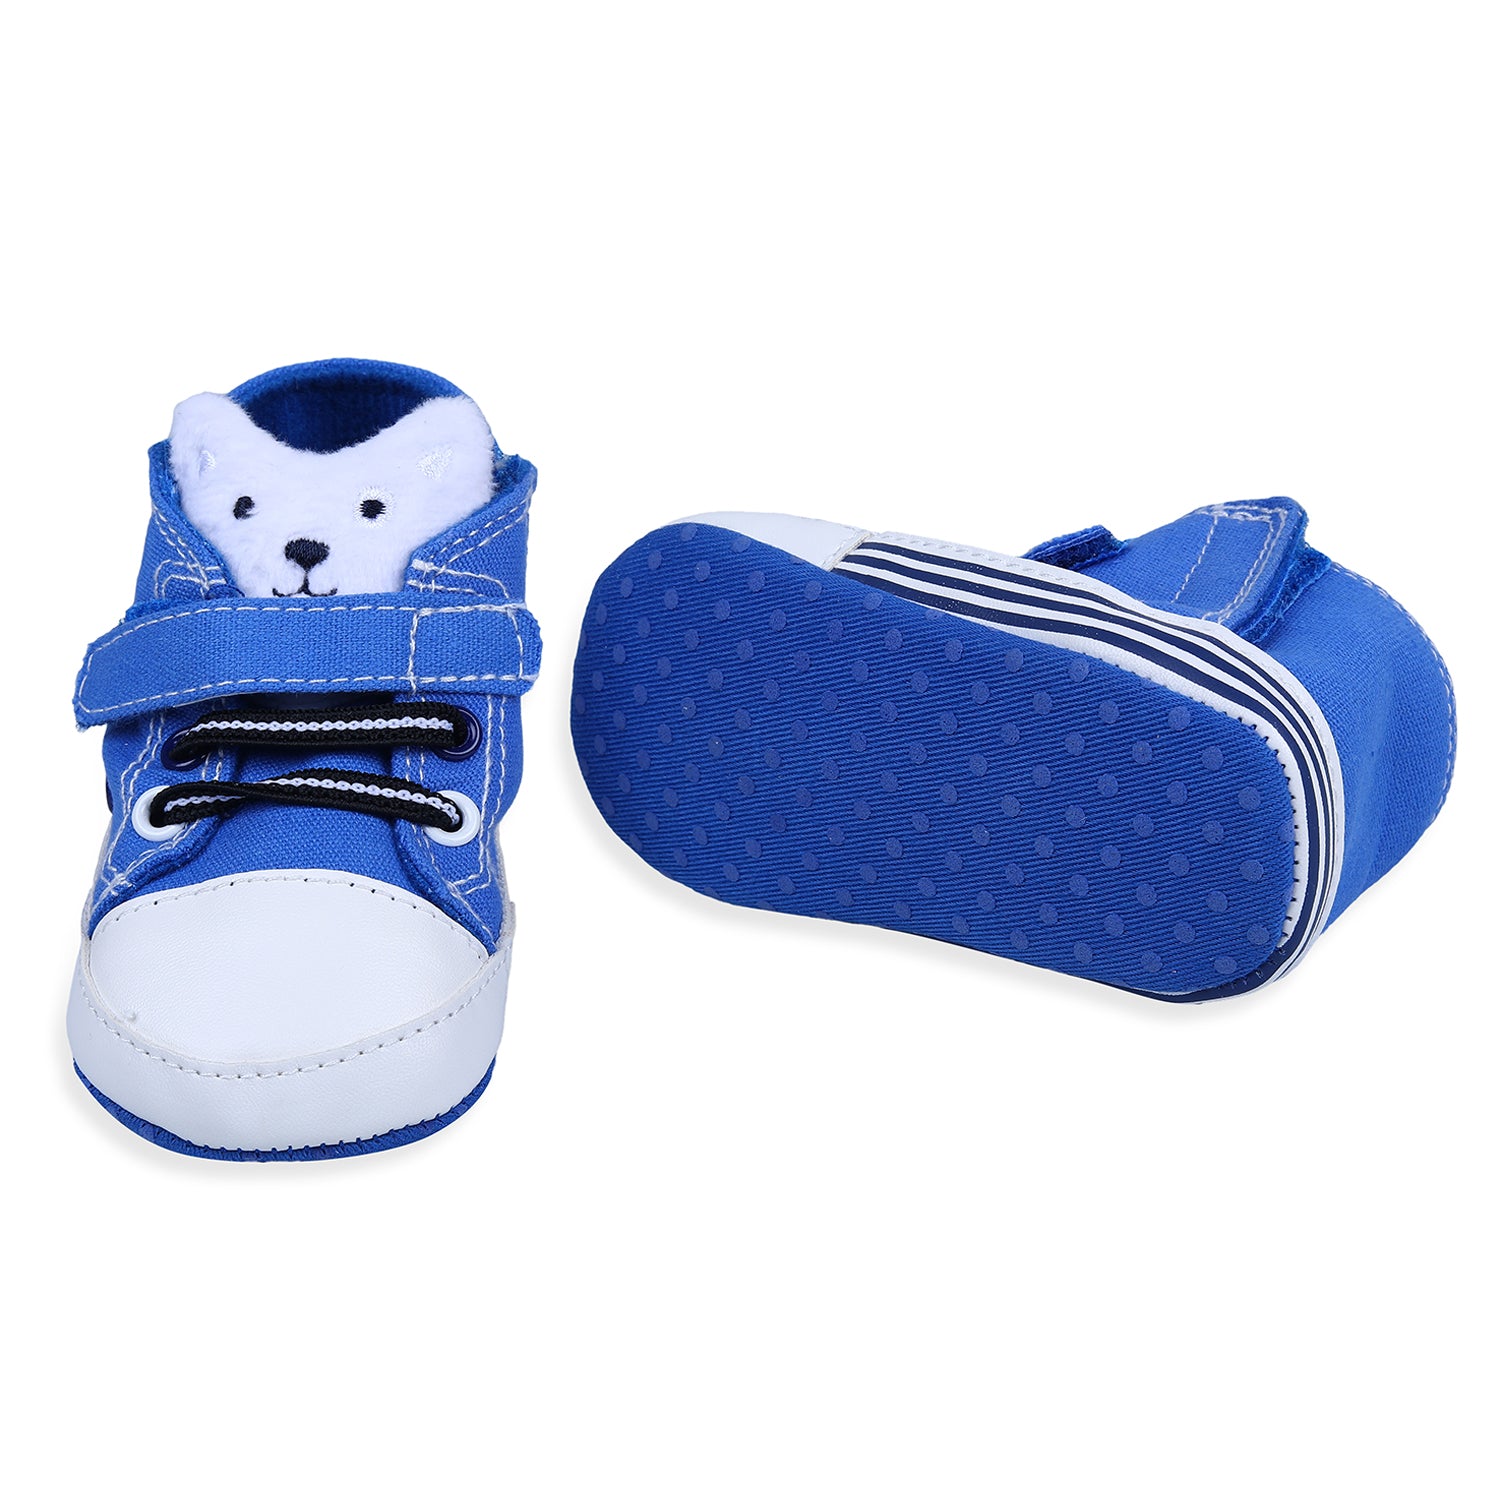 My Buddy Bear Cute And Stylish Comfy Velcro Booties - Blue